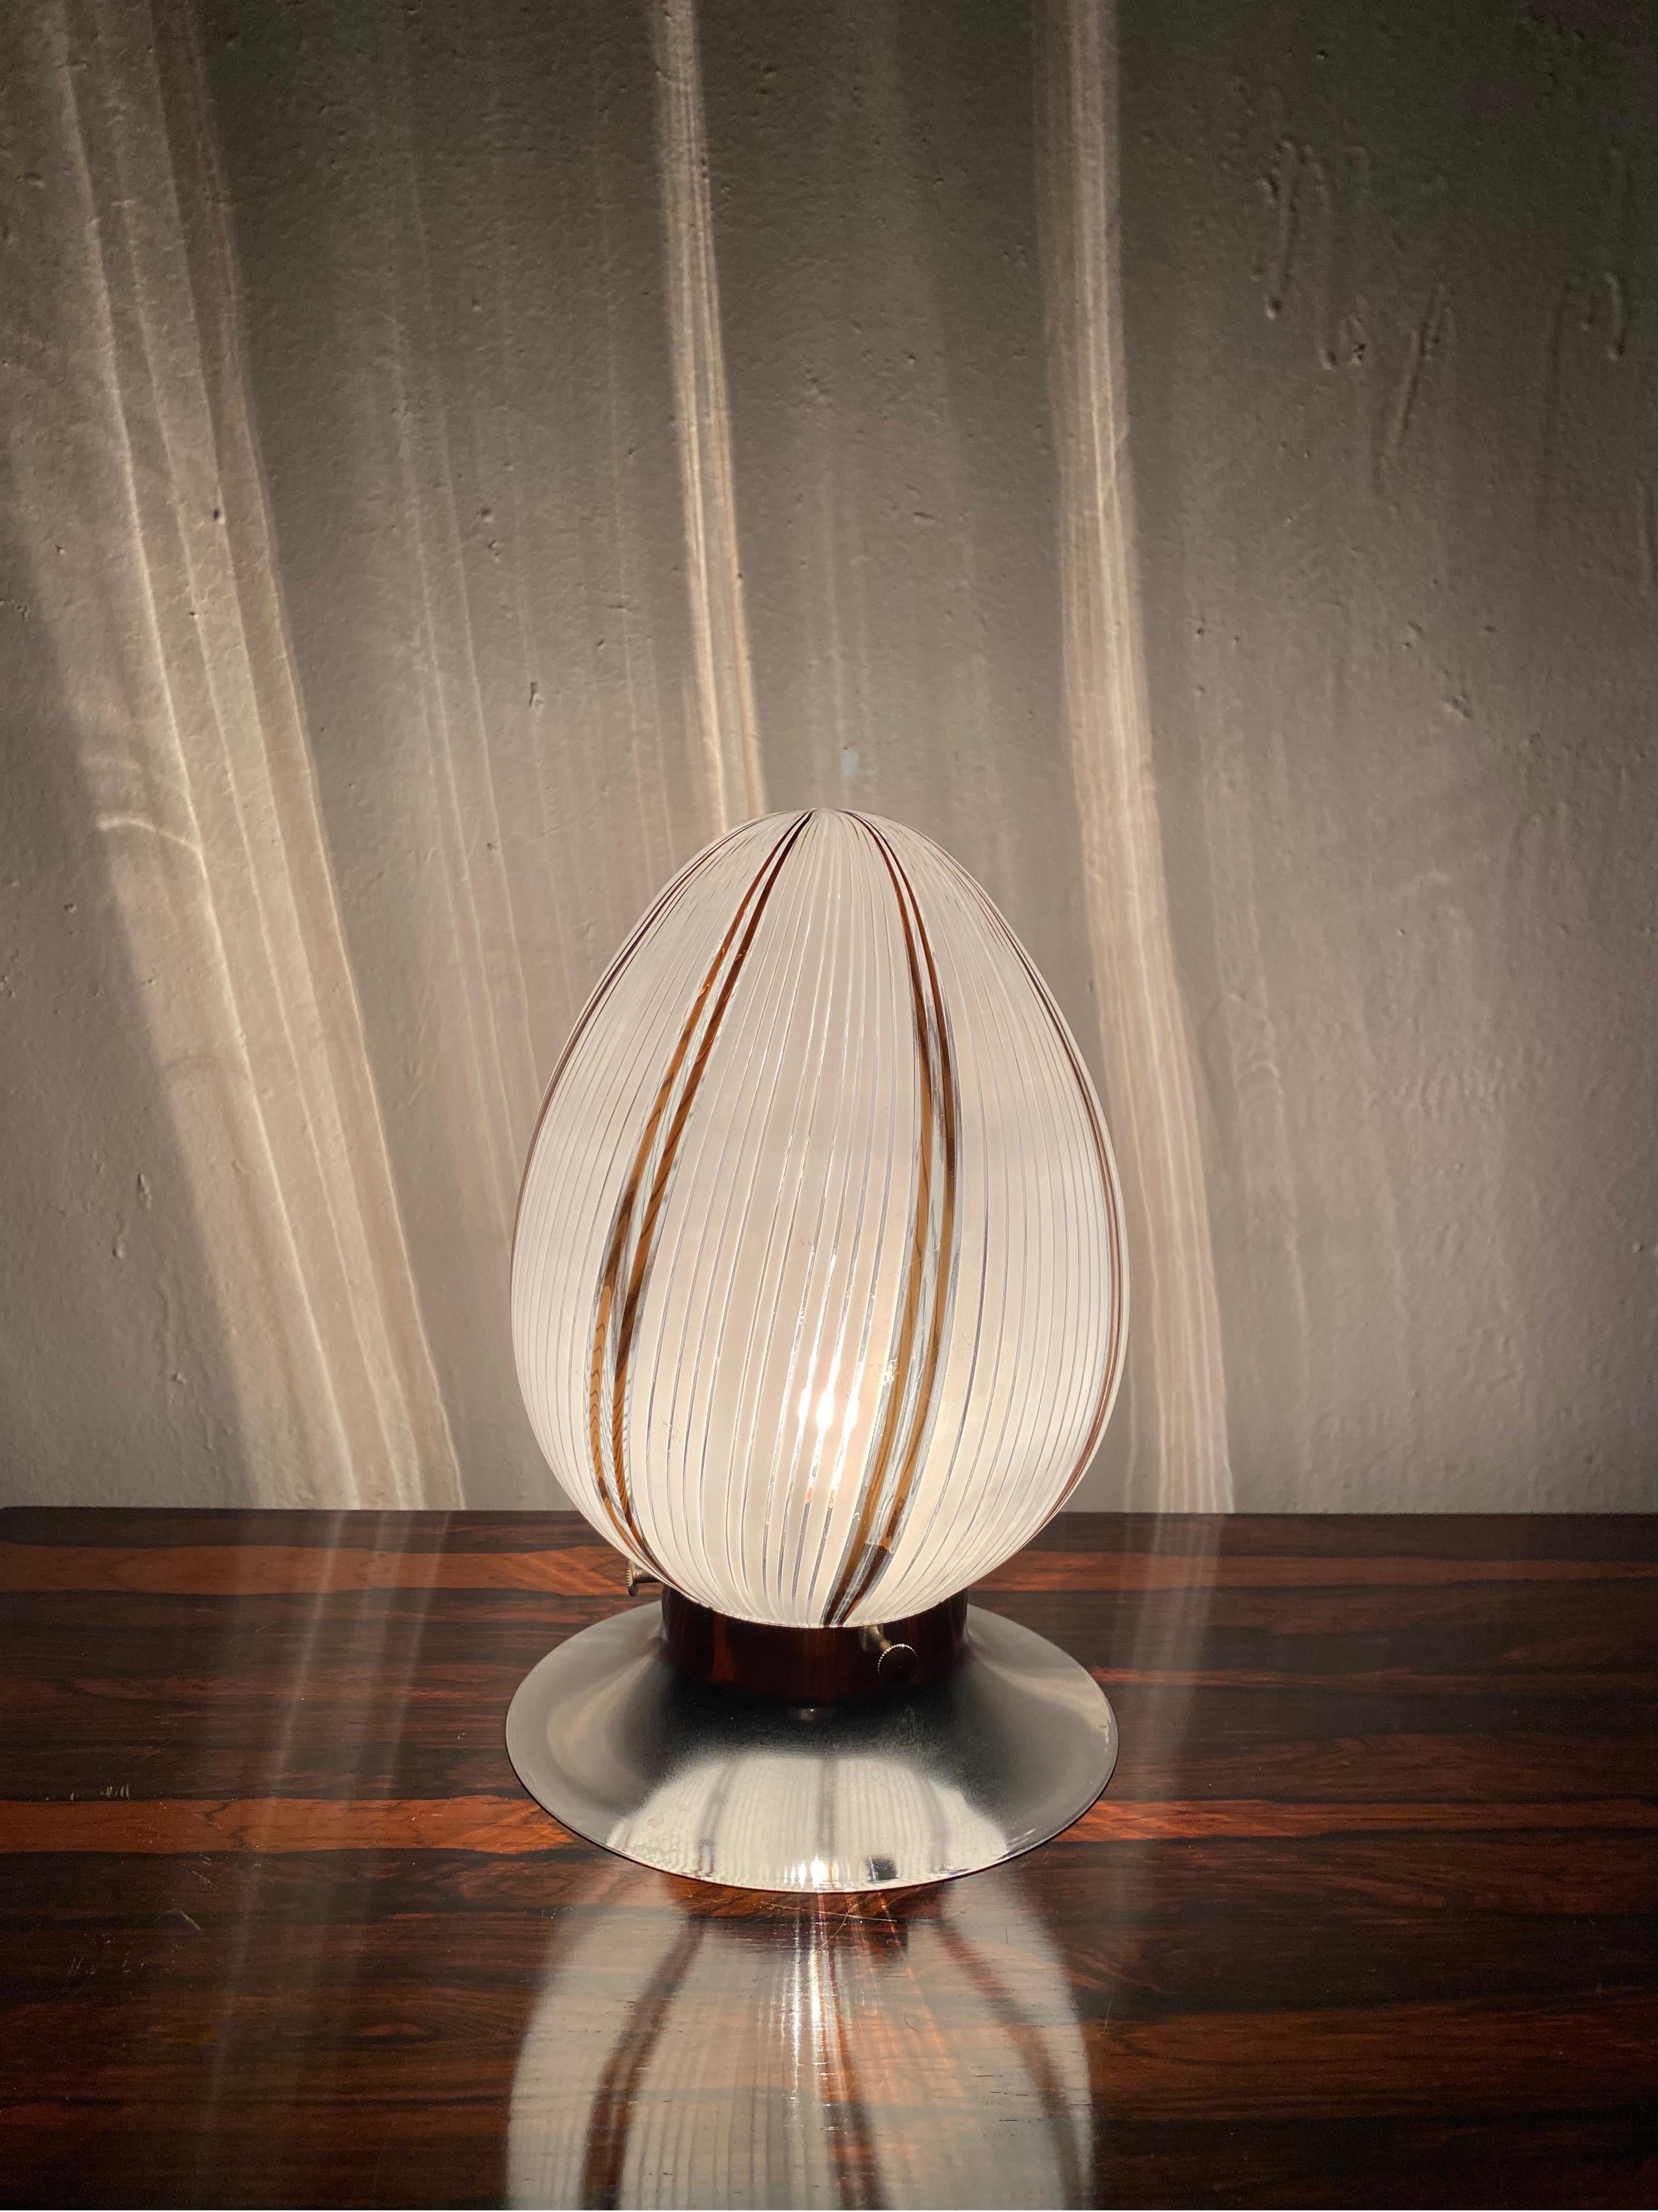 Pair of Mid-Century Modern Table Lamps Attributed to Venini, Murano, circa 1980 For Sale 5